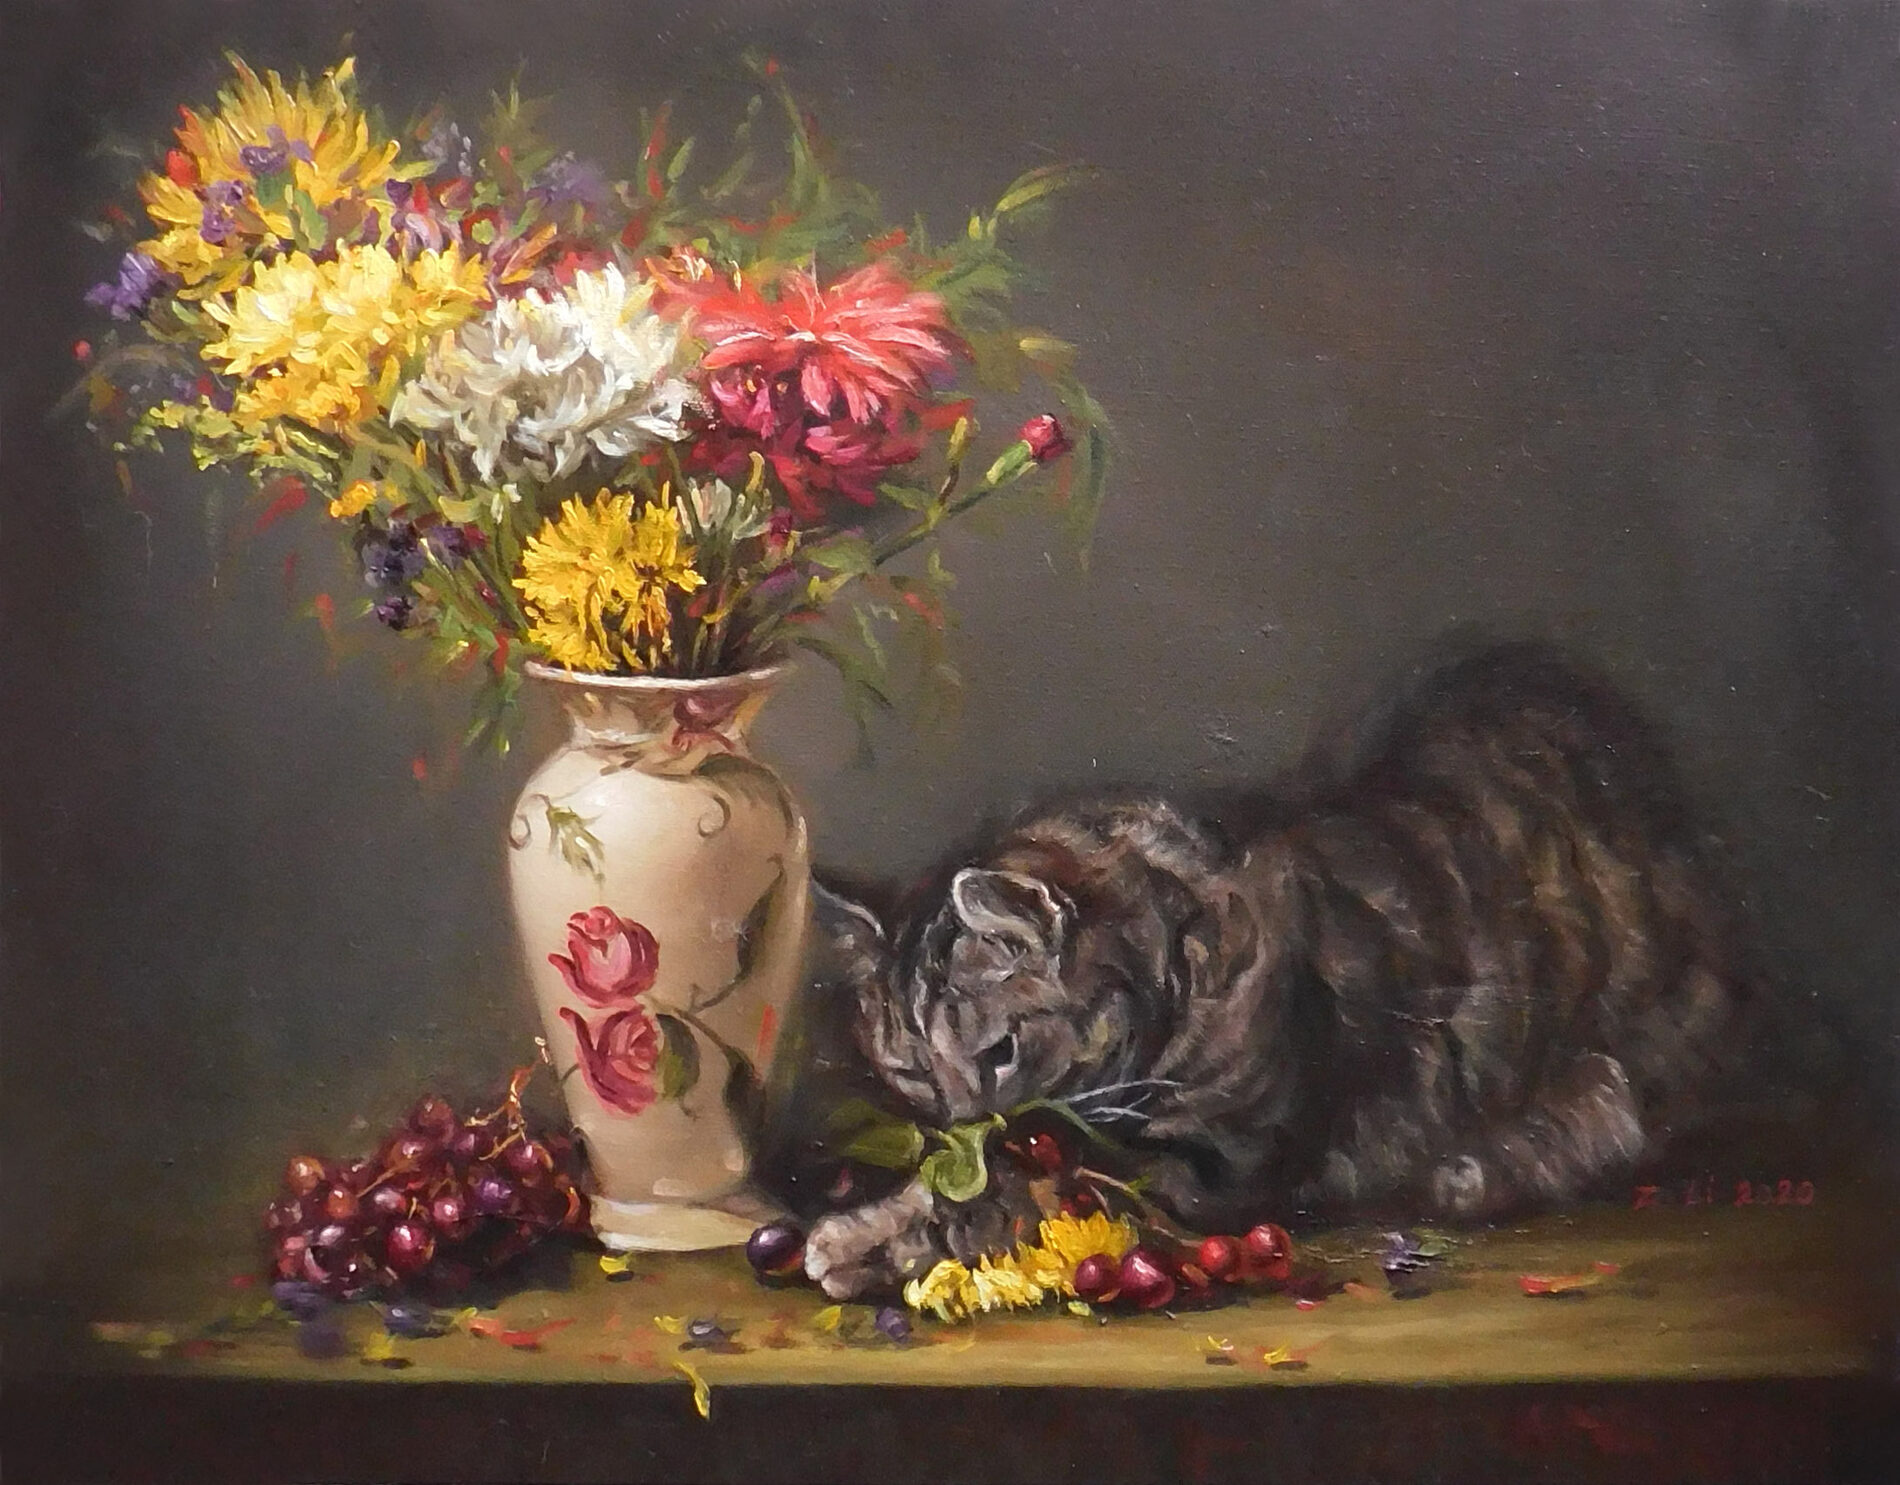 A cat plays with grapes and fallen flowers on a table next to a vase with assorted flowers.